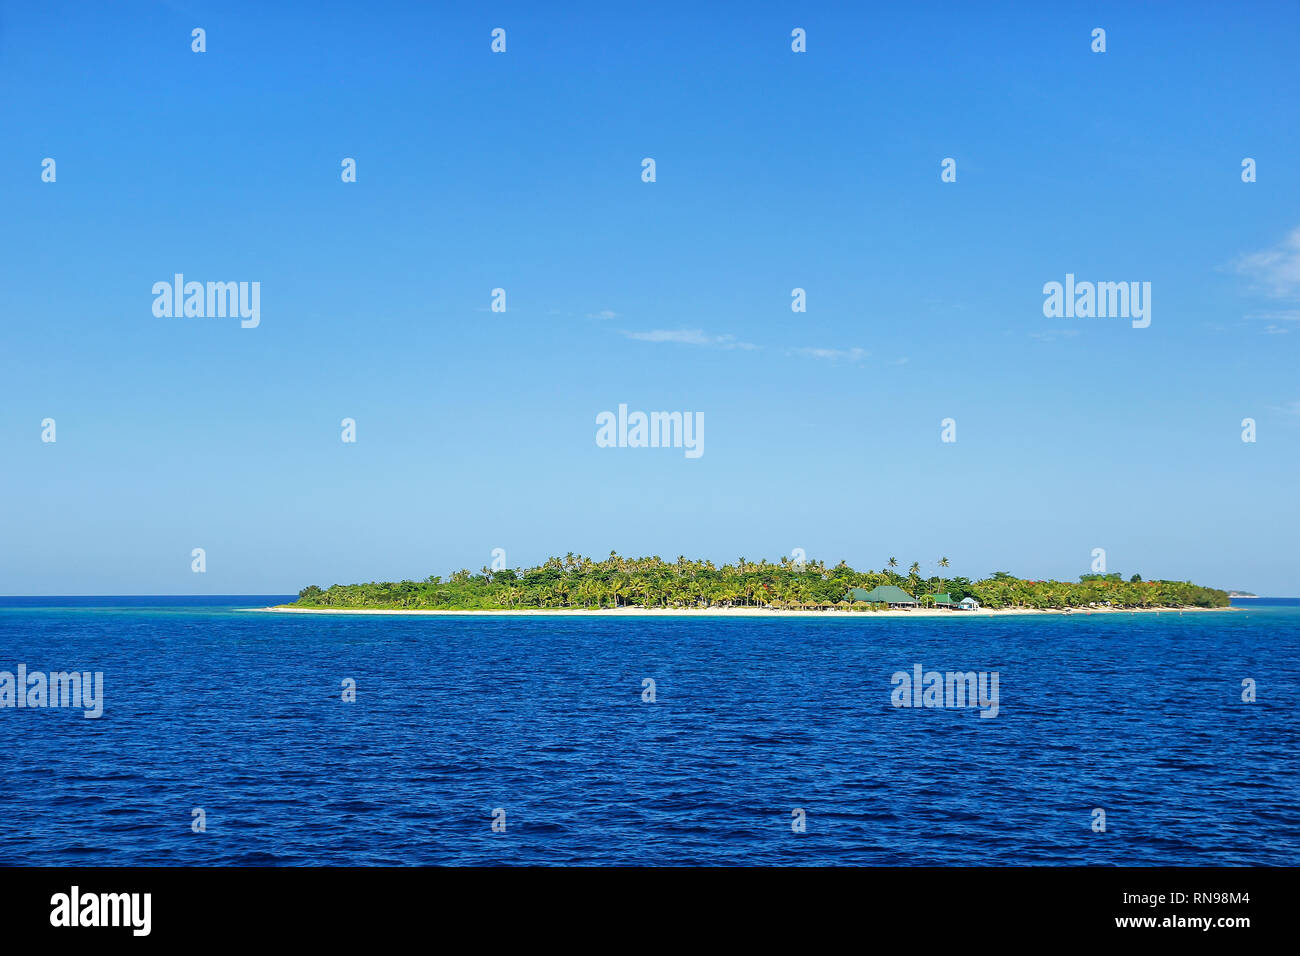 Small South Sea Island in Mamanuca Island group, Fiji. This group consists of about 20 islands. Stock Photo